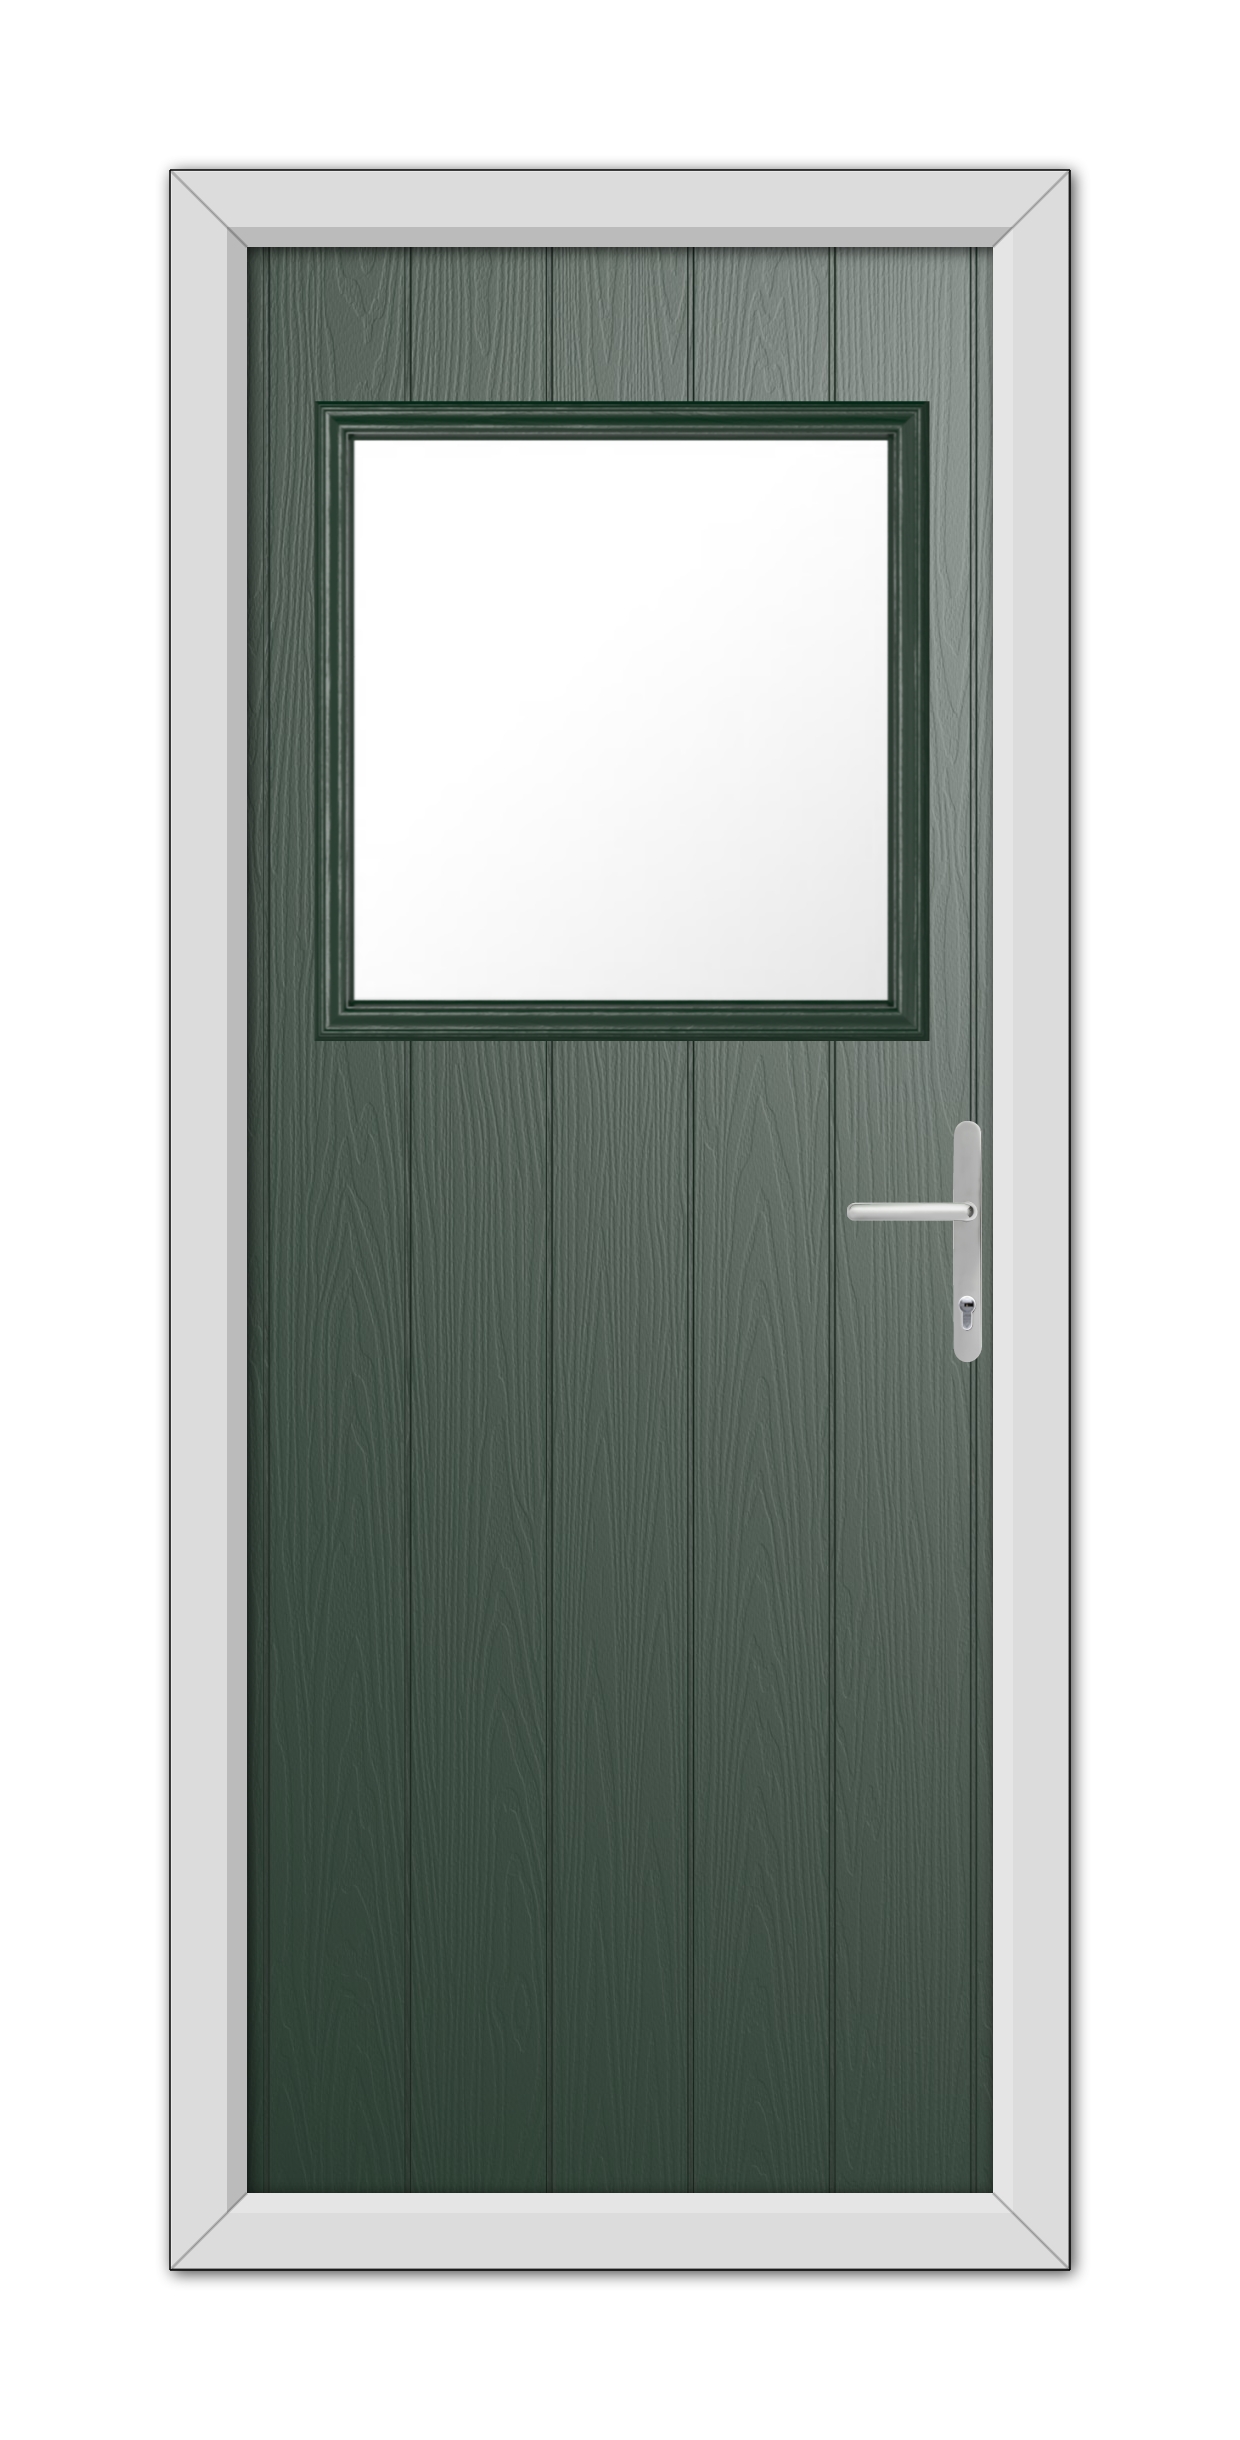 A Green Fife Composite Door 48mm Timber Core with a rectangular window at the top and a metallic handle on the right side, set in a white frame.